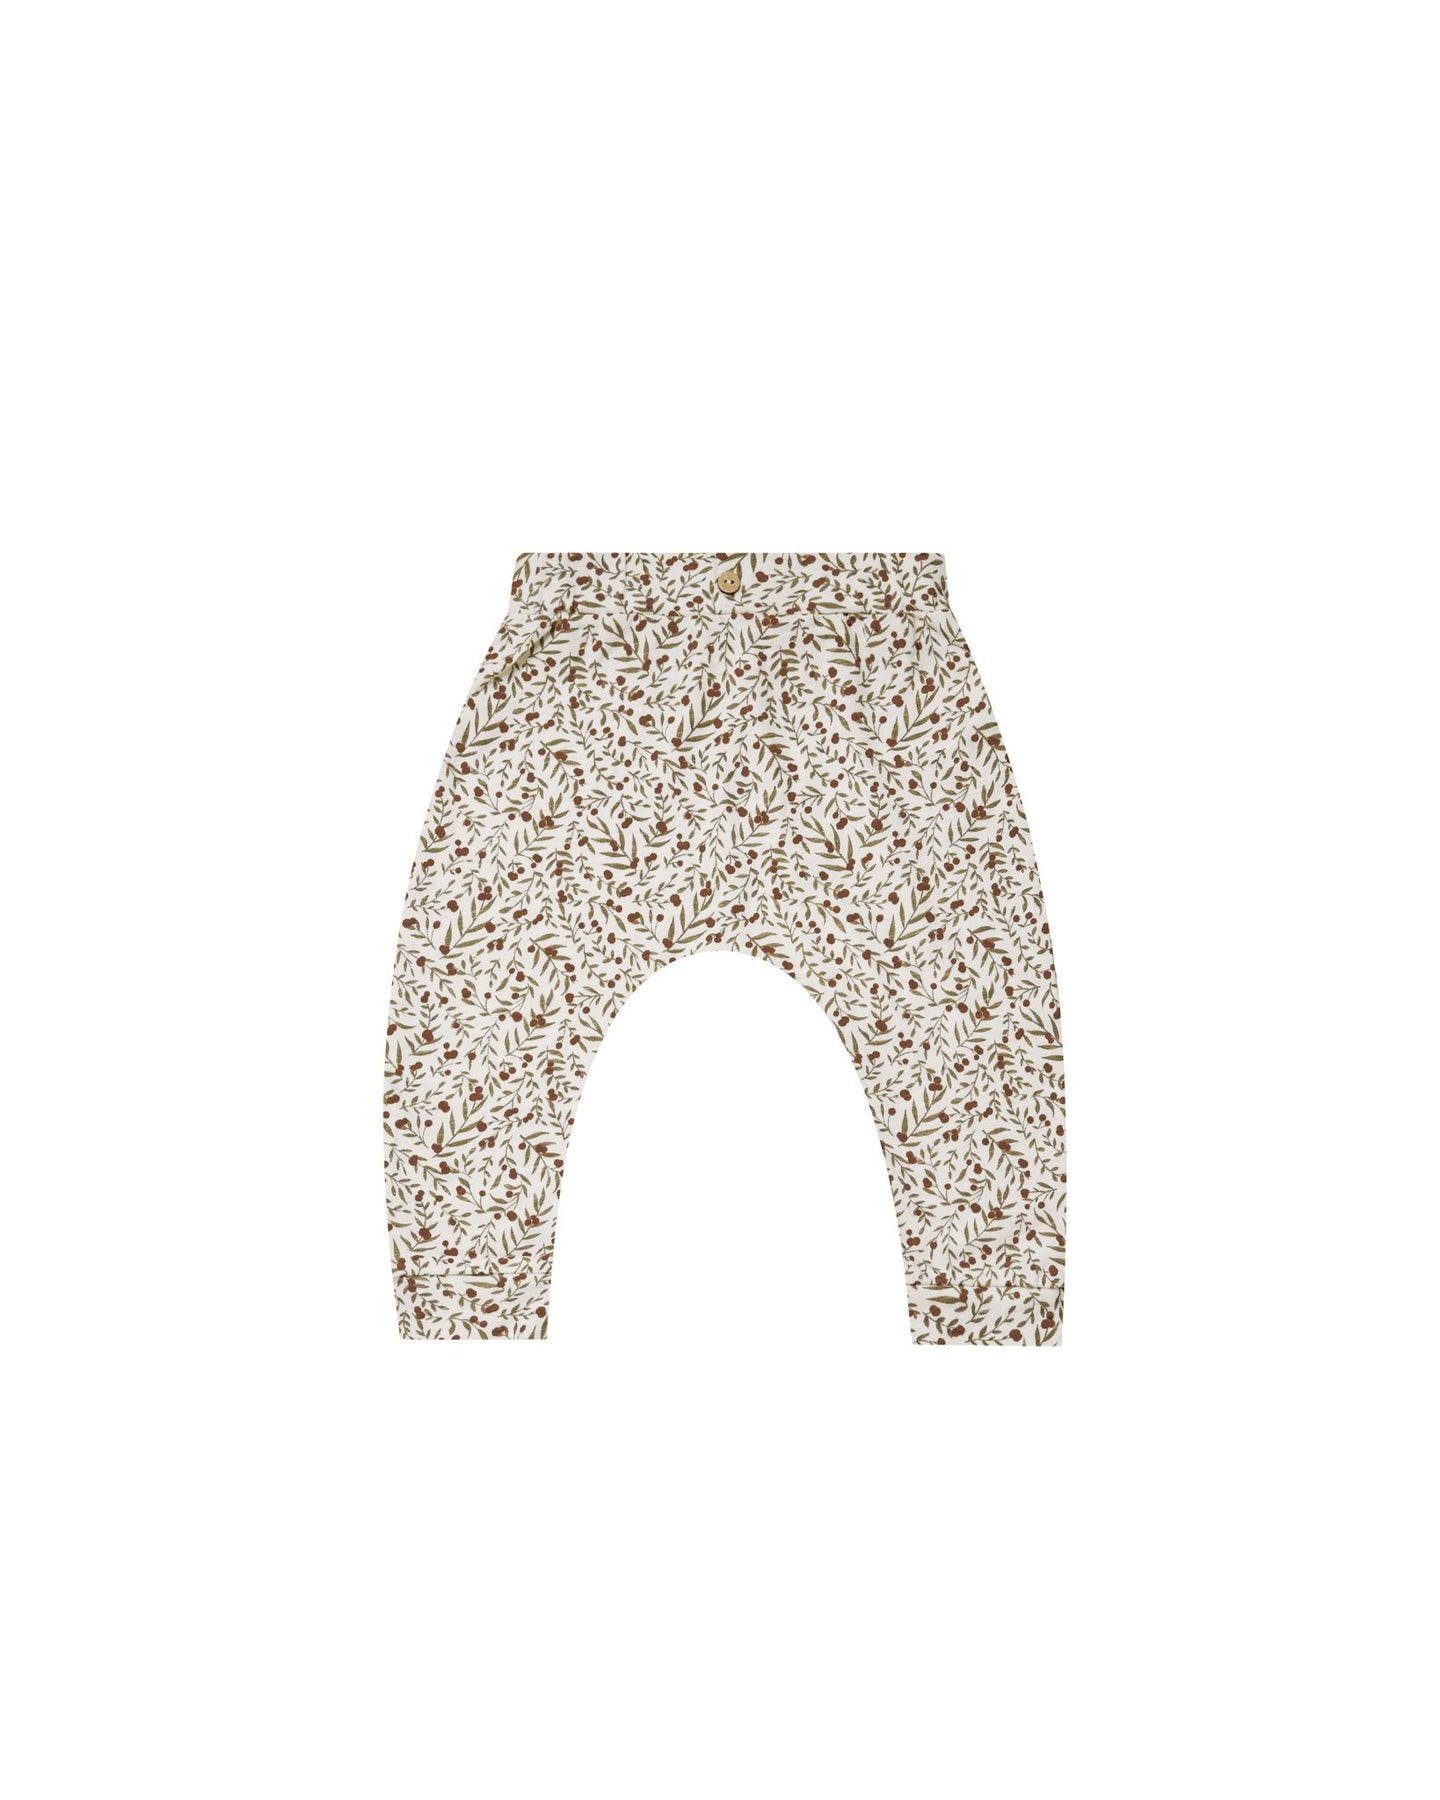 Rylee + Cru - Holly Vines Slouch Pant - Natural